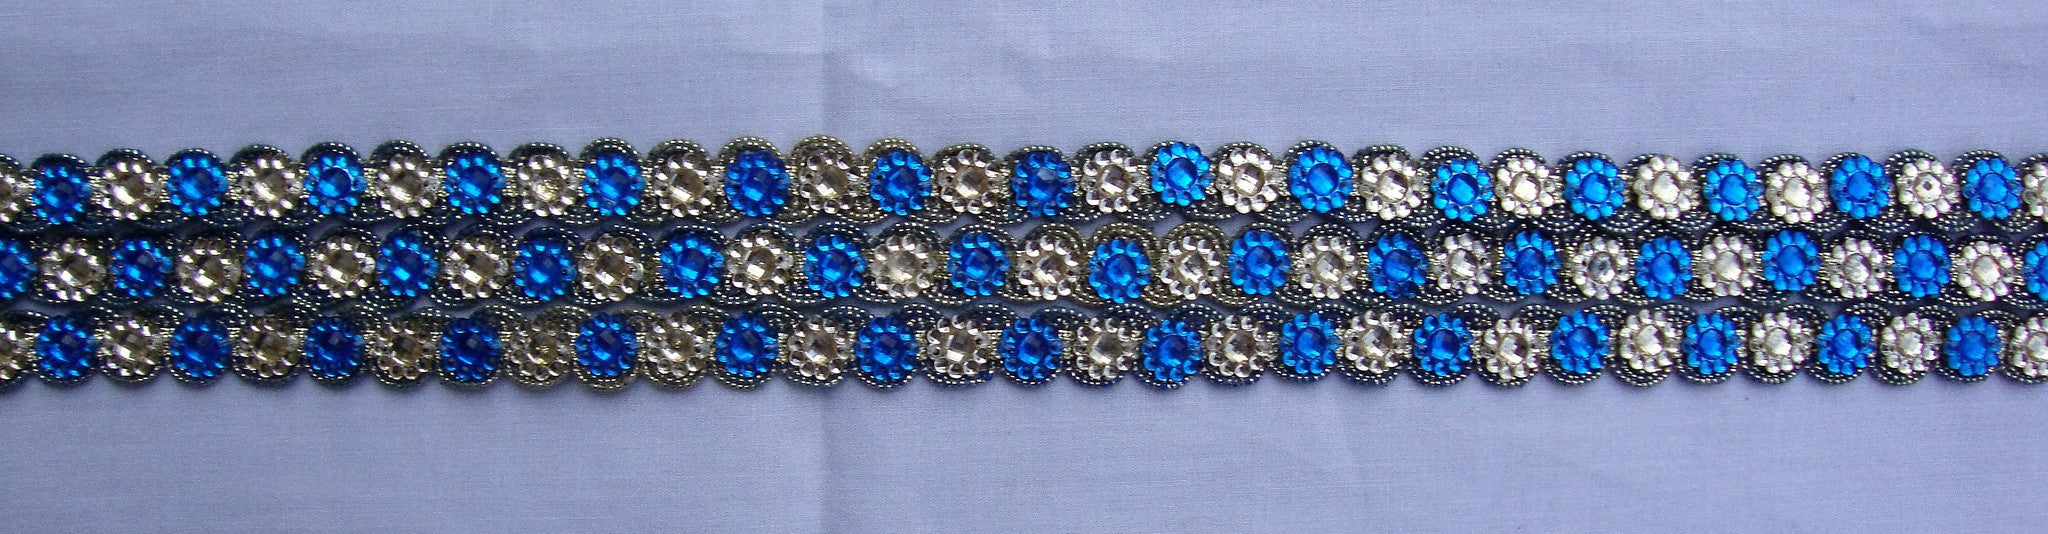 Blue Beaded Trimming (Sold as a 3 yard piece)